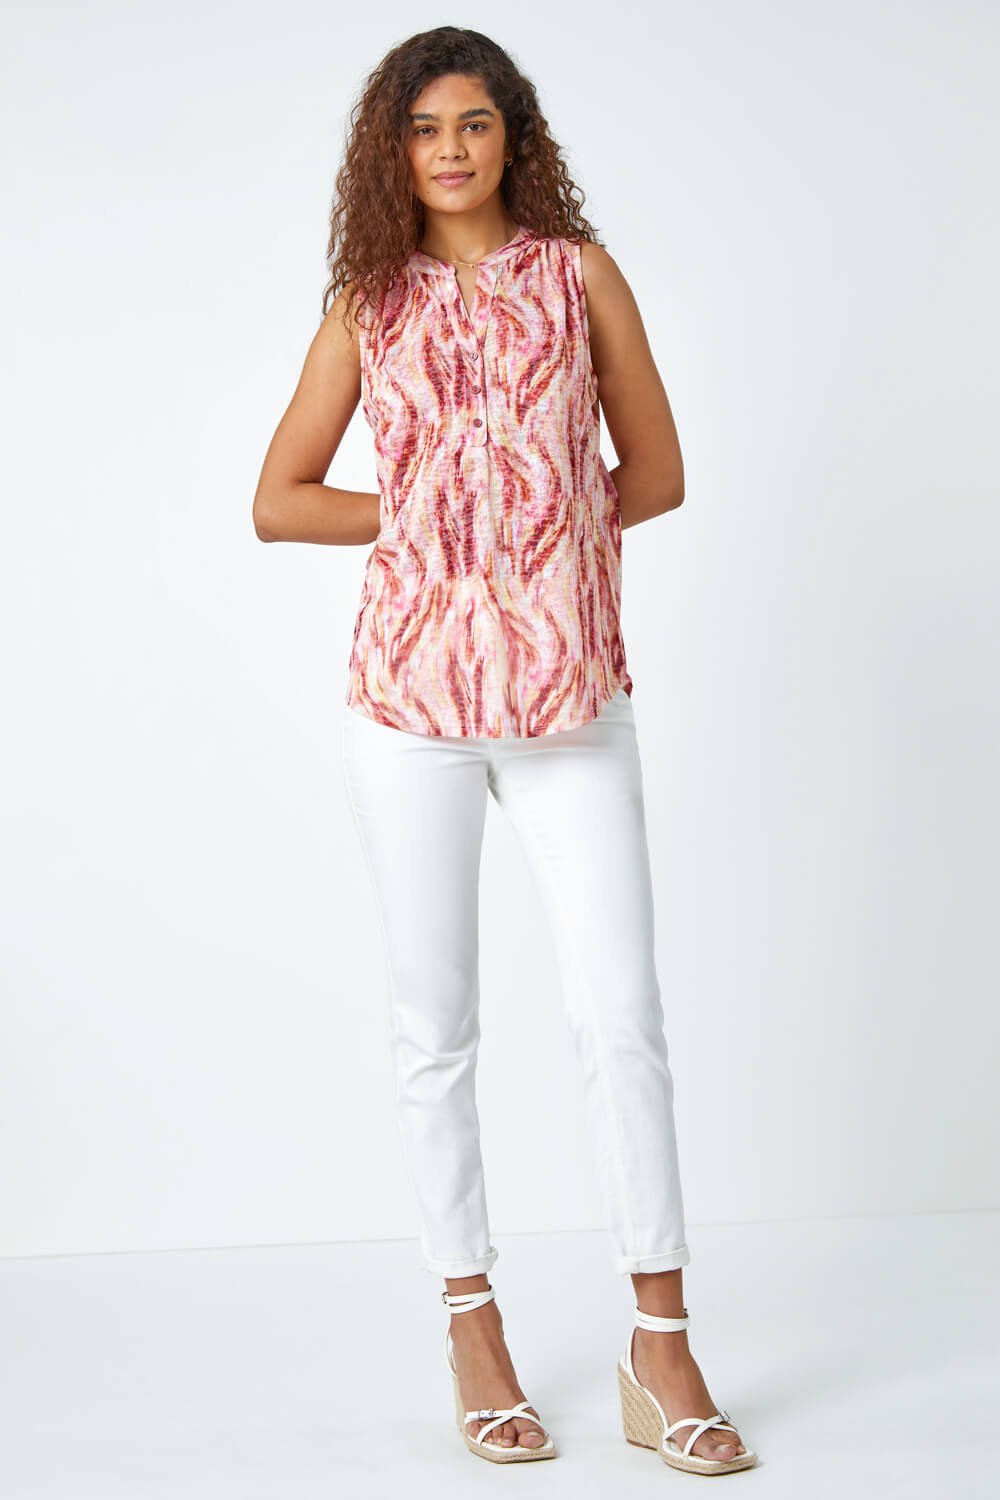 PINK Abstract Burnout Sleeveless Stretch Top, Image 2 of 5